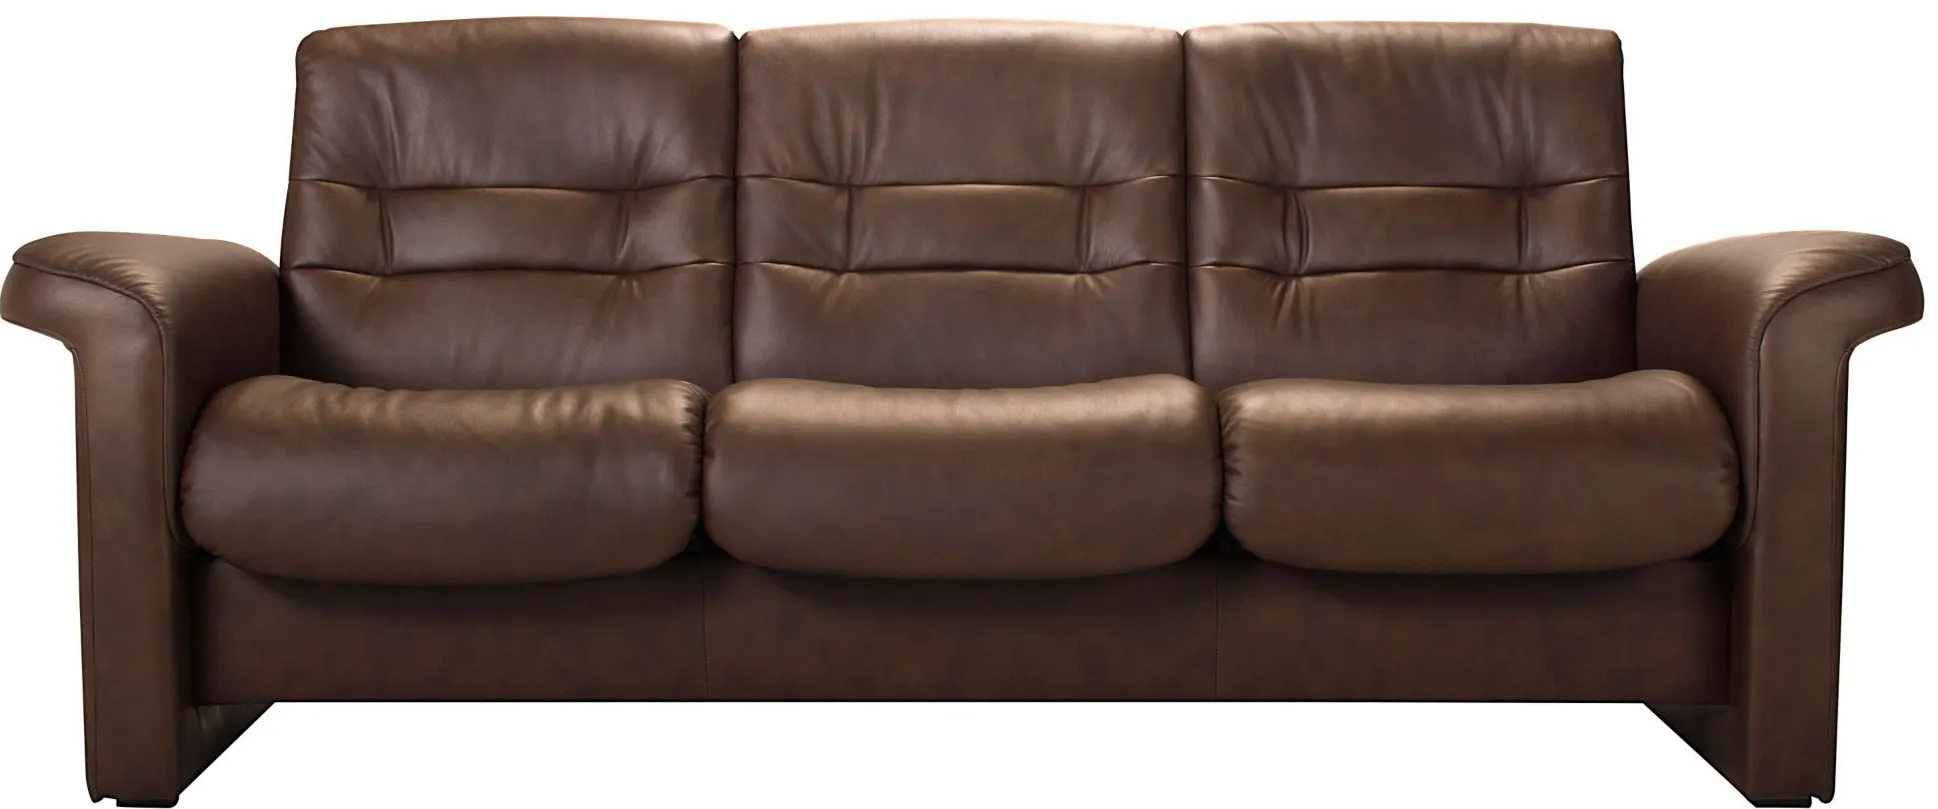 Stressless Sapphire Leather Reclining Low-Back Sofa in Chocolate by Stressless